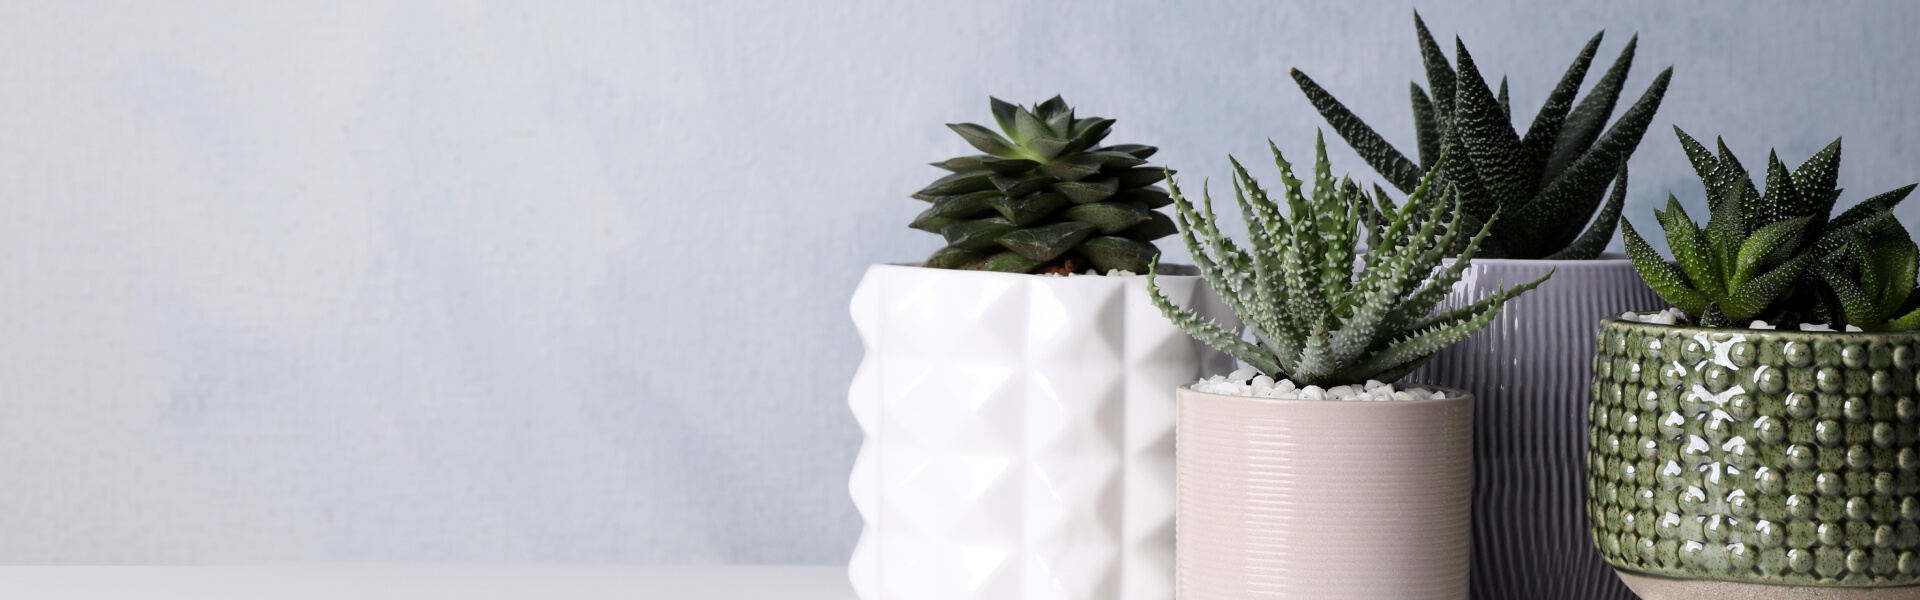 Cacti & Succulent Gifts Delivered to Canada